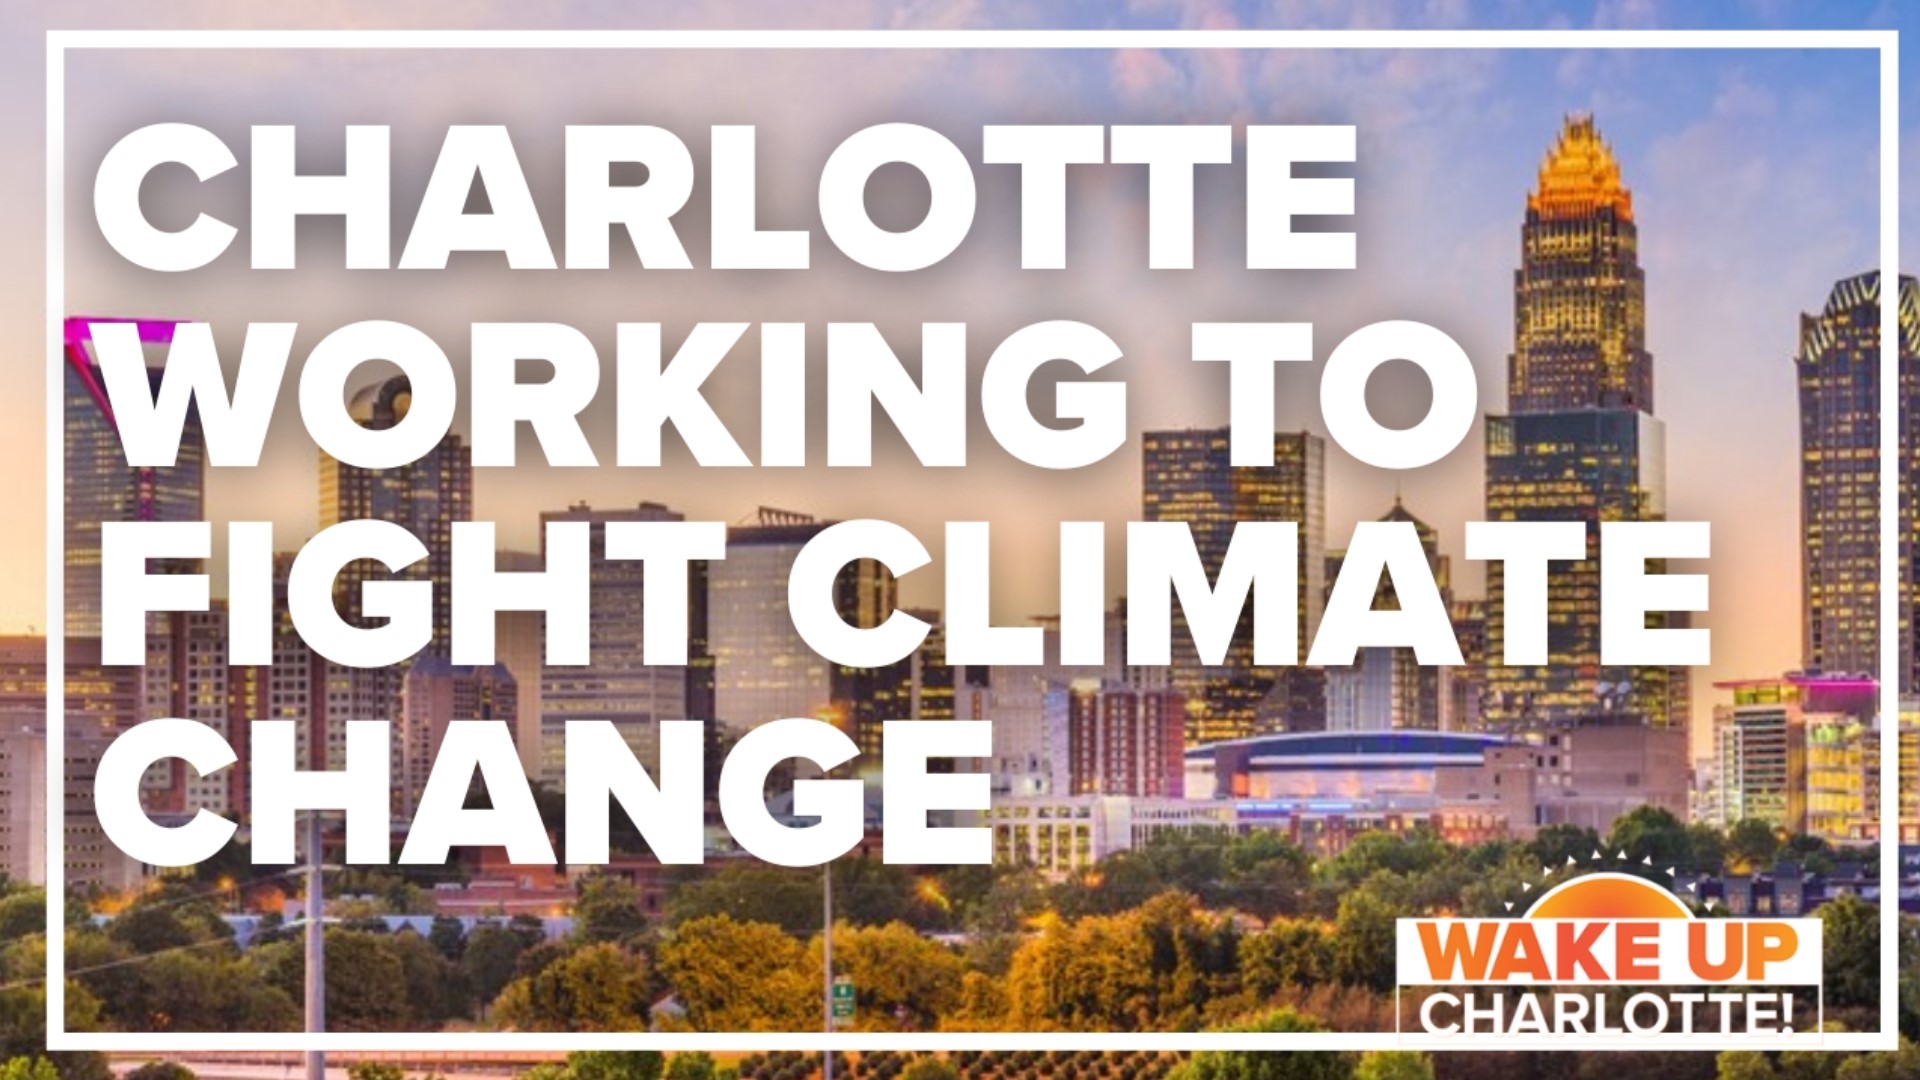 The city of Charlotte is working to meet its goal to become a low-carbon city by 2050.